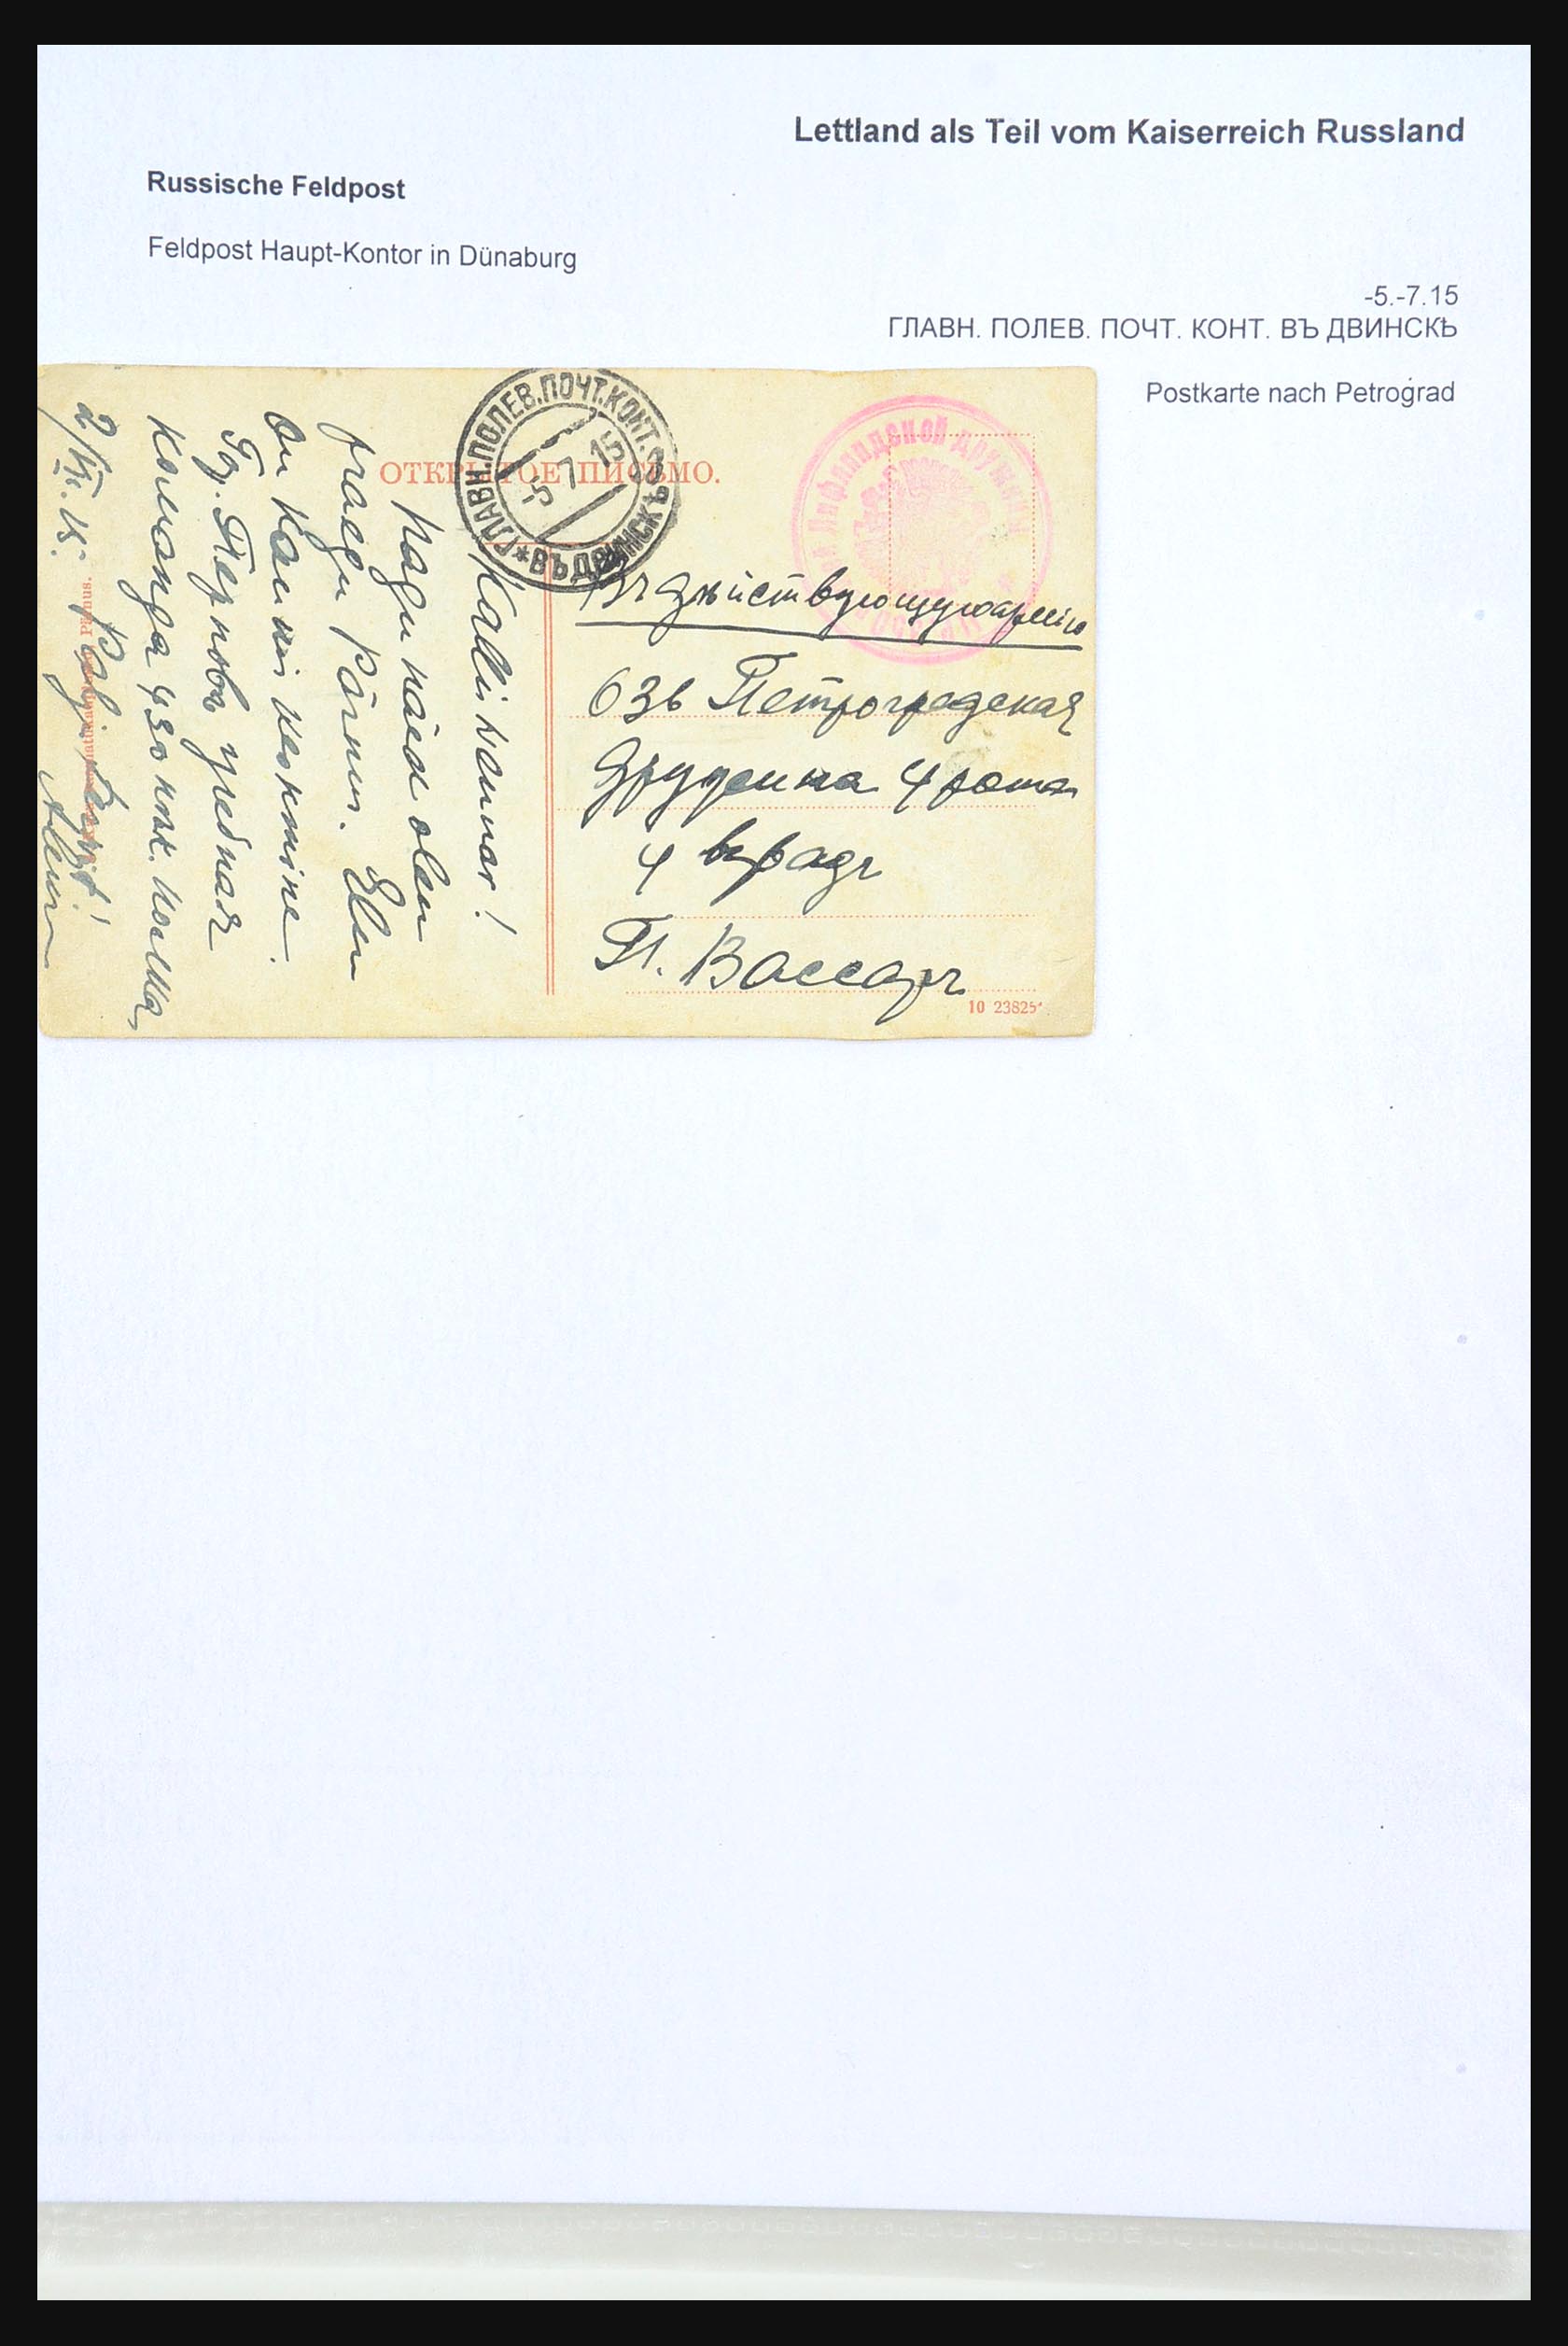 31305 100 - 31305 Latvia as part of Russia 1817-1918.